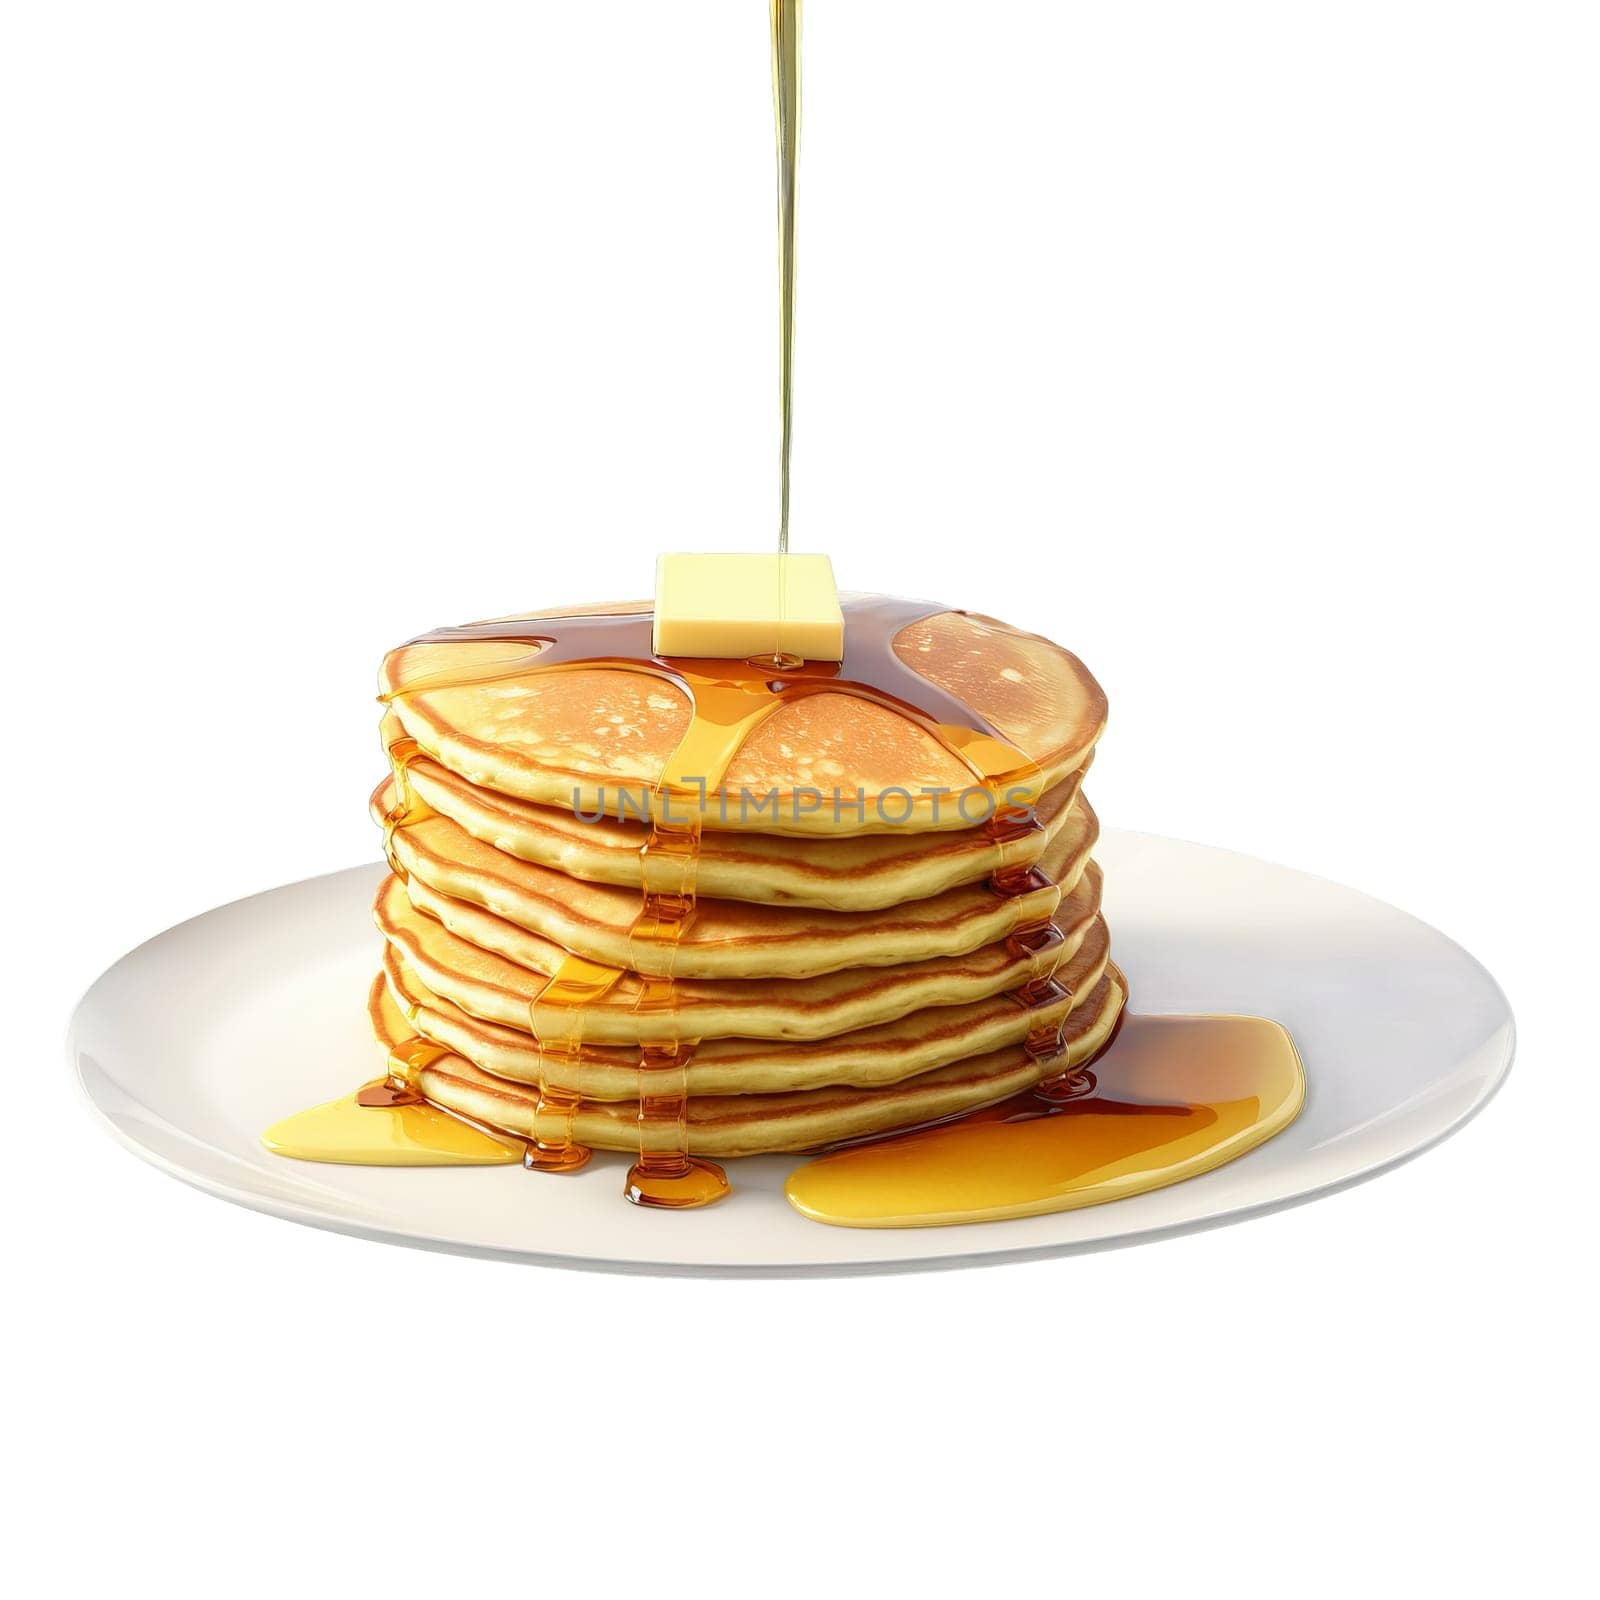 Pancakes stack in glass dish maple syrup pouring butter melting Food and Culinary concept. Food isolated on transparent background.